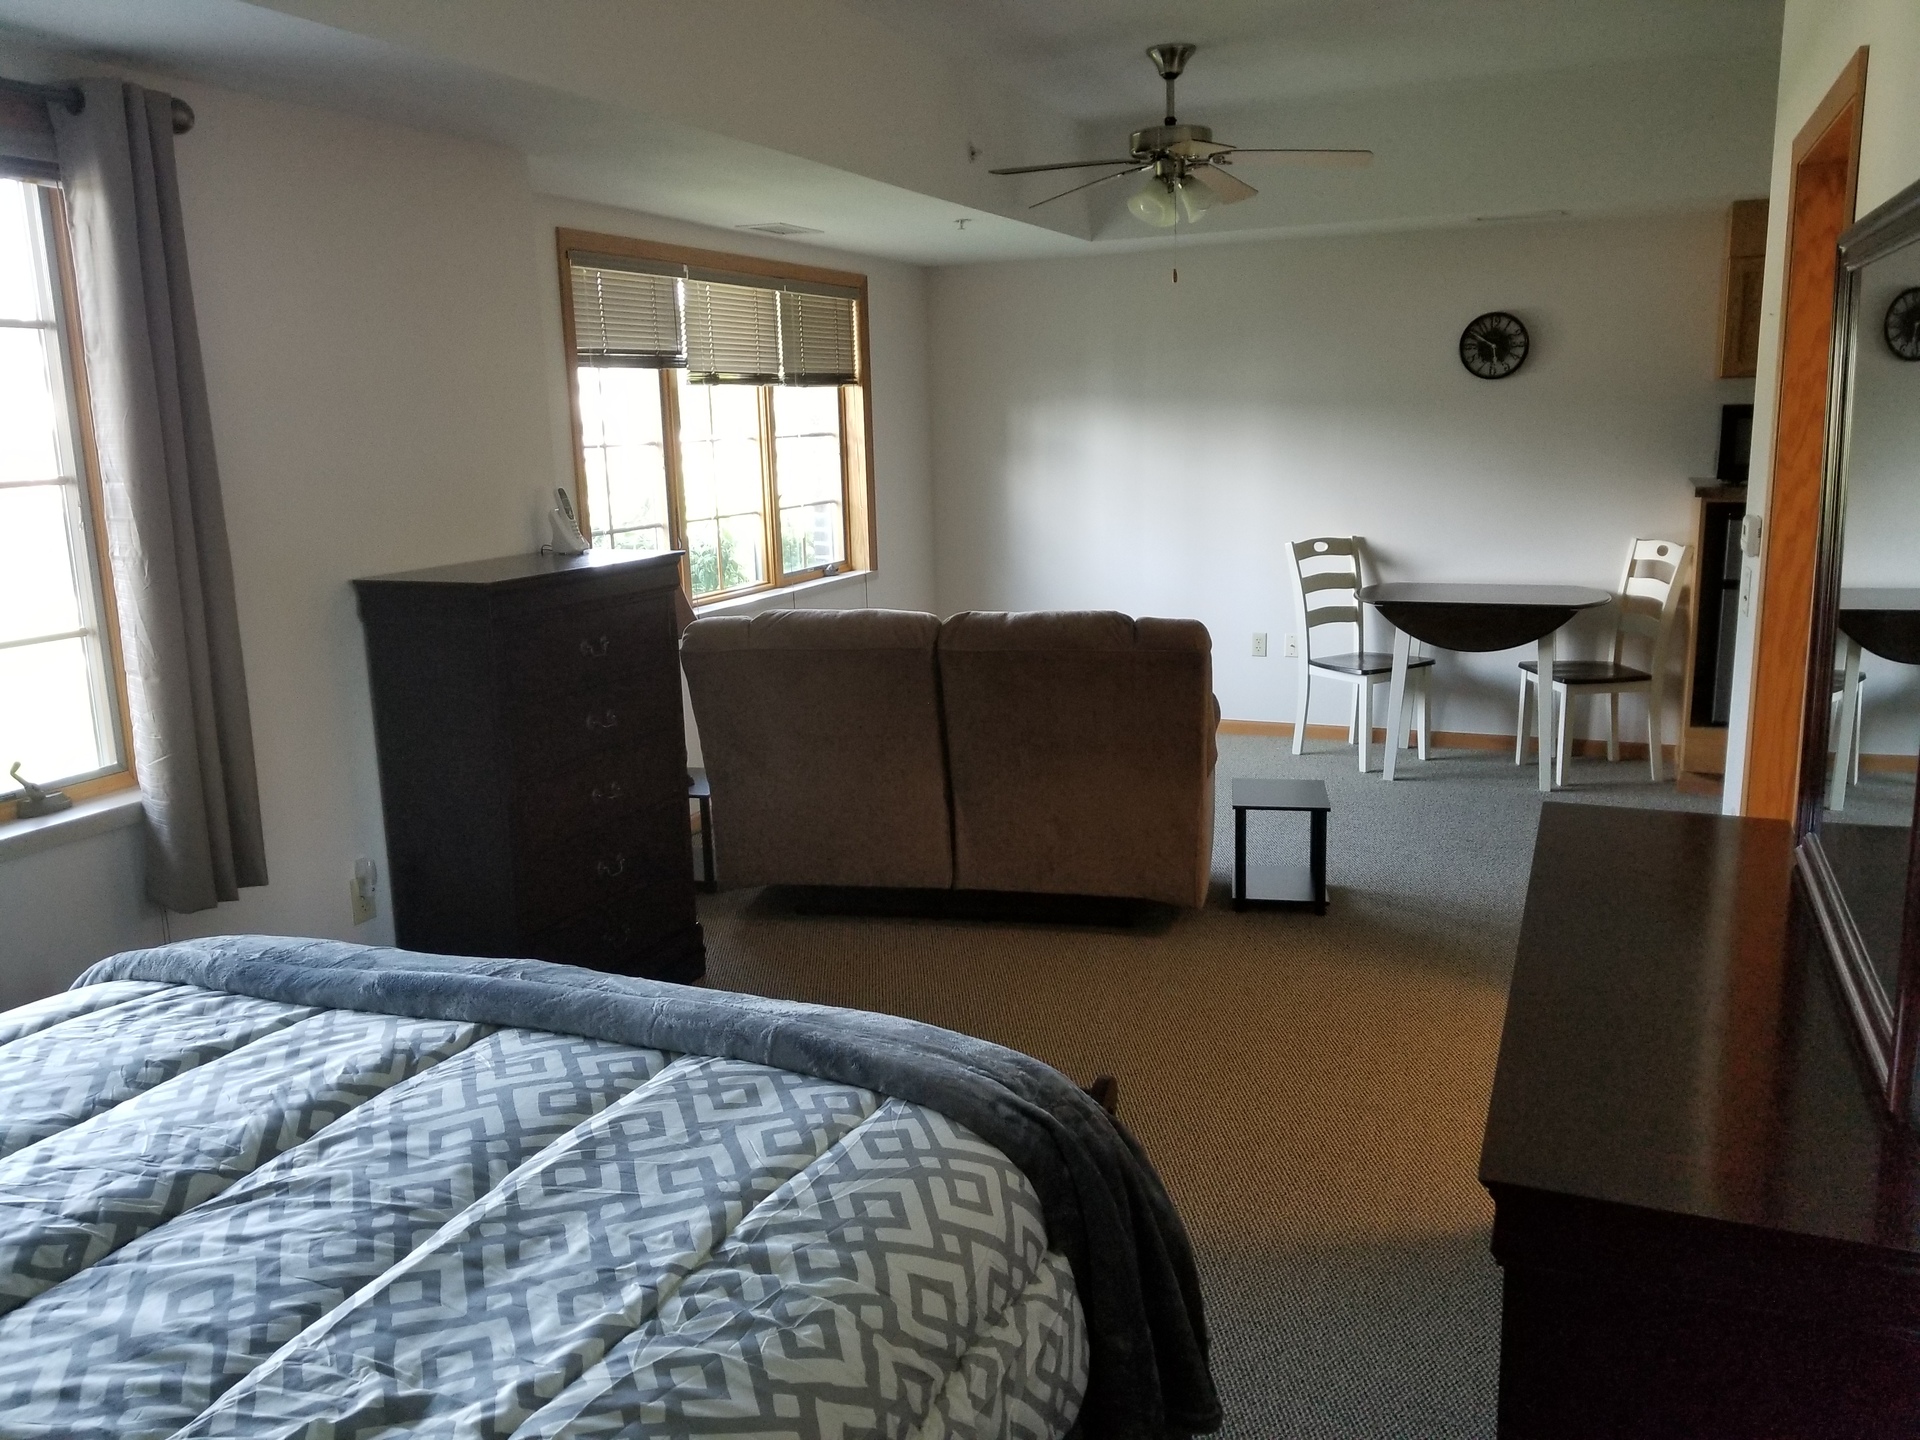 Furnished Studio Apartmens For The Elderly in Red Cloud NE